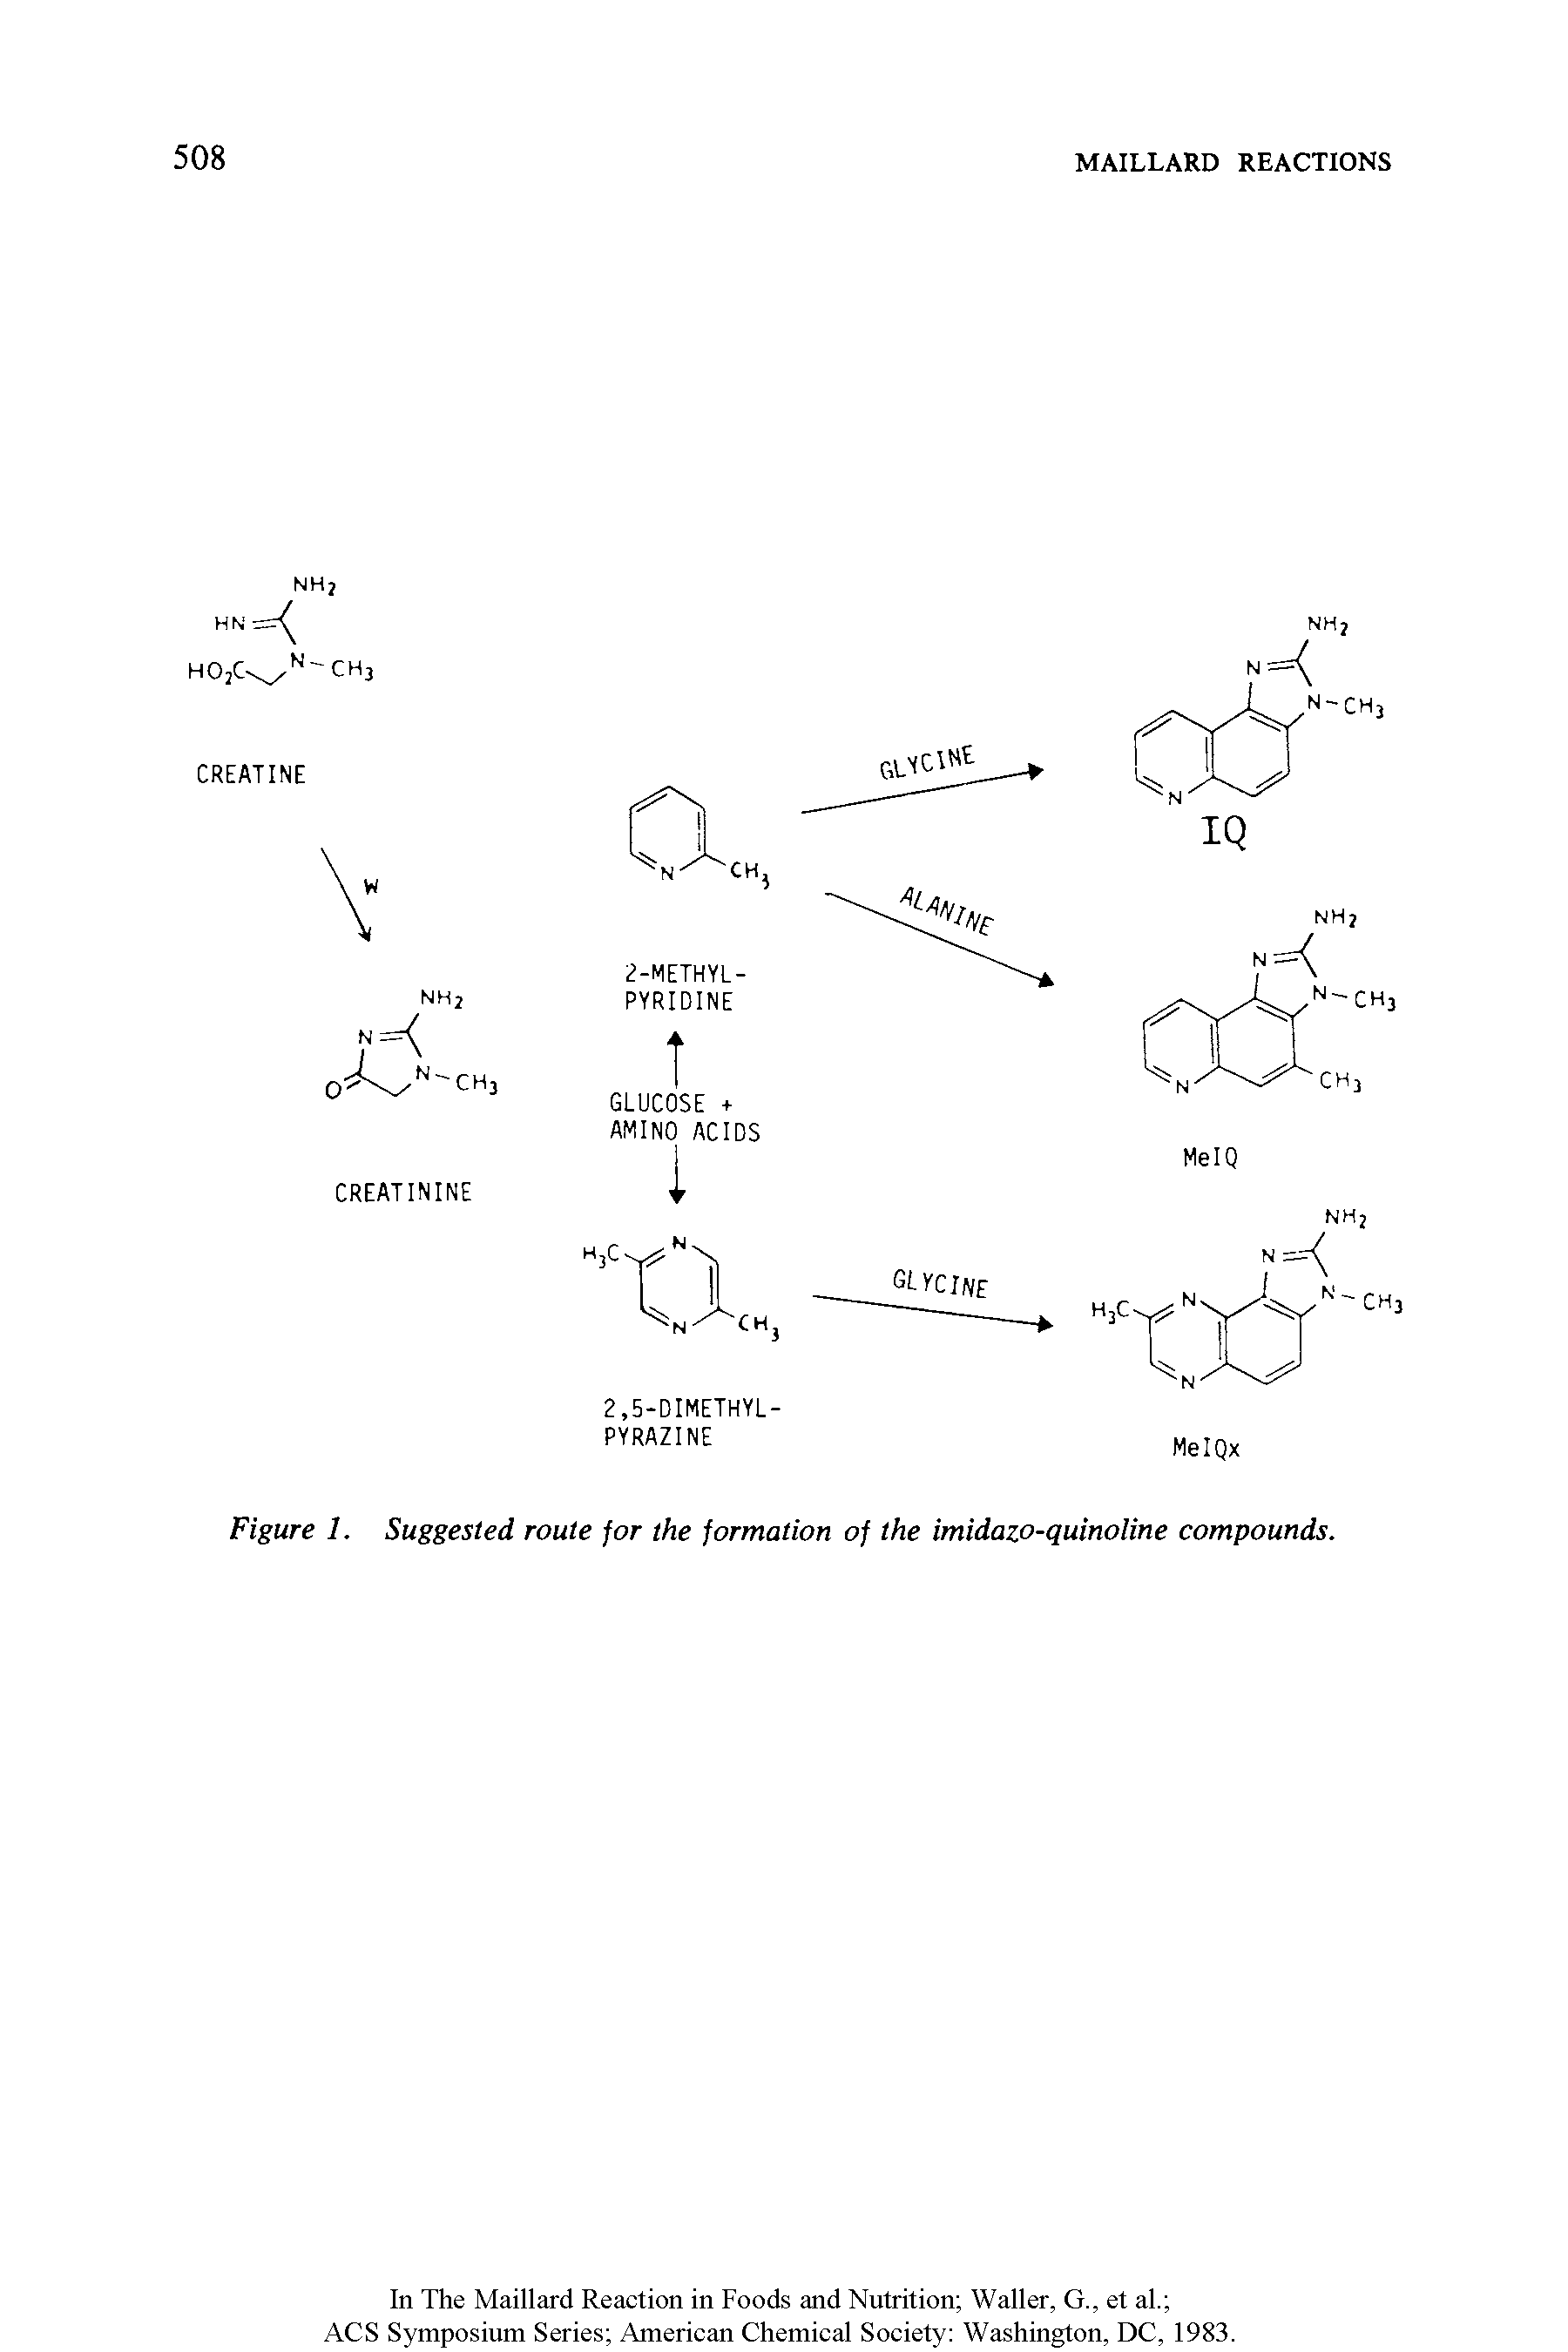 Figure 1. Suggested route for the formation of the imidazo-quinoline compounds.